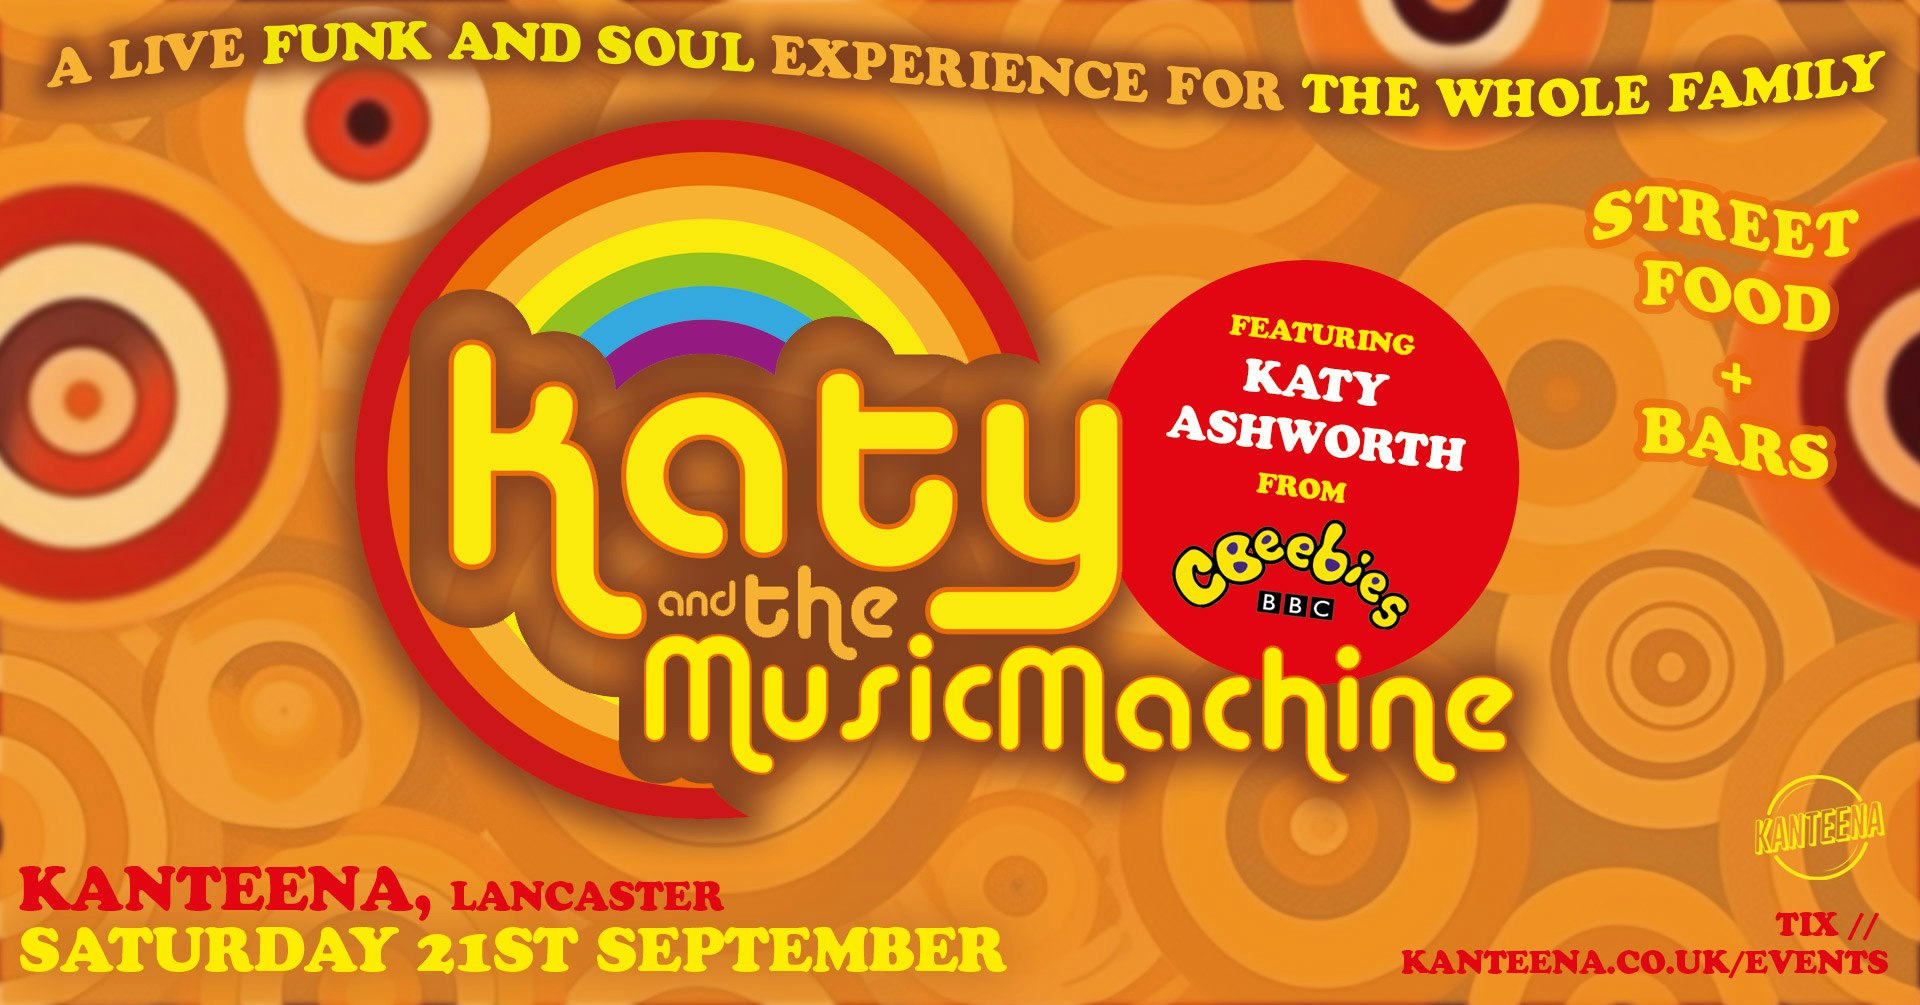 Katy and the Music Machine! ﻿﻿Featuring Katy Ashworth From Cbeebies